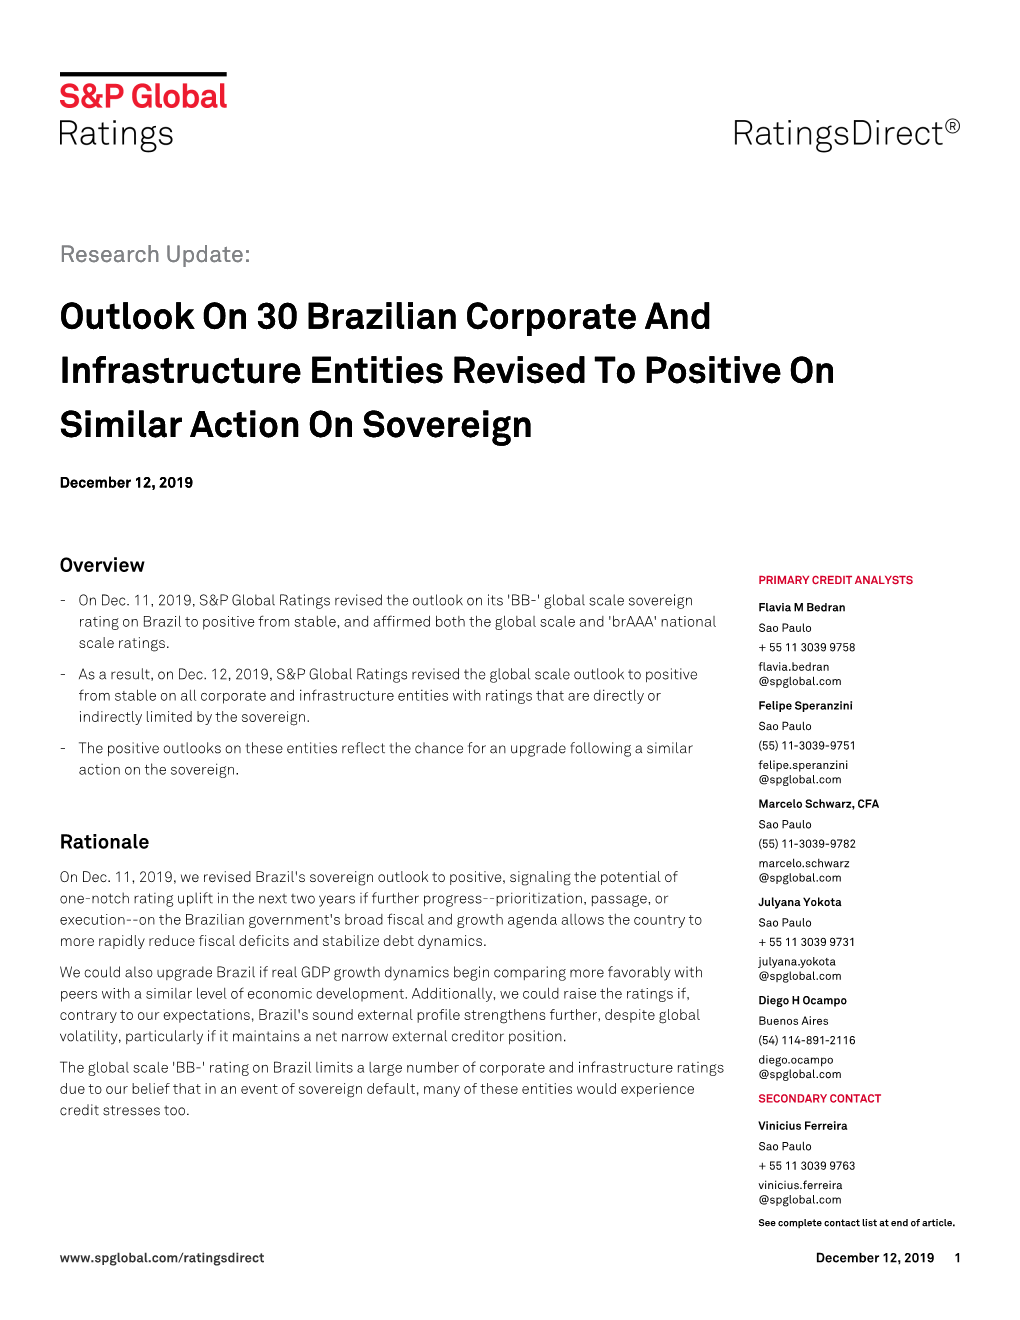 Outlook on 30 Brazilian Corporate and Infrastructure Entities Revised to Positive on Similar Action on Sovereign